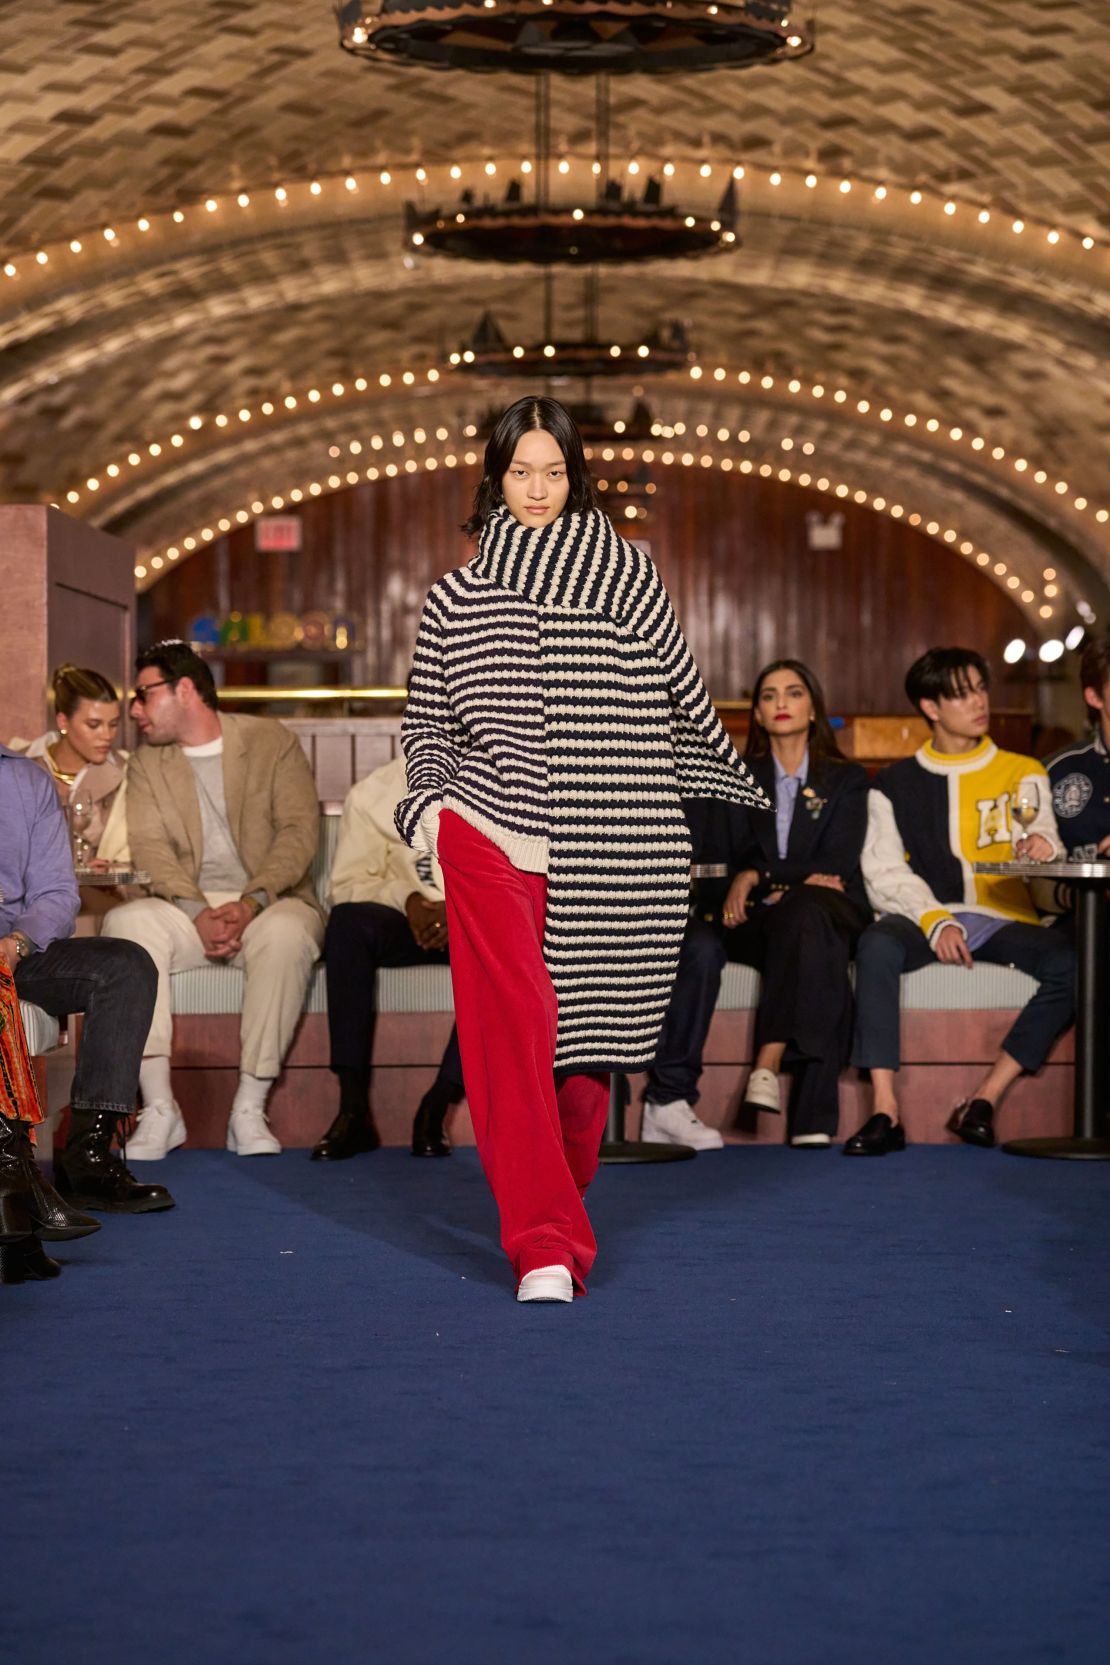 Hilfiger's collection embodied "the spirit of prep, modernized through a New York lens," its show notes explained, "channeling the city’s unique style and reinterpreting it with a distinctly 'Tommy' twist."